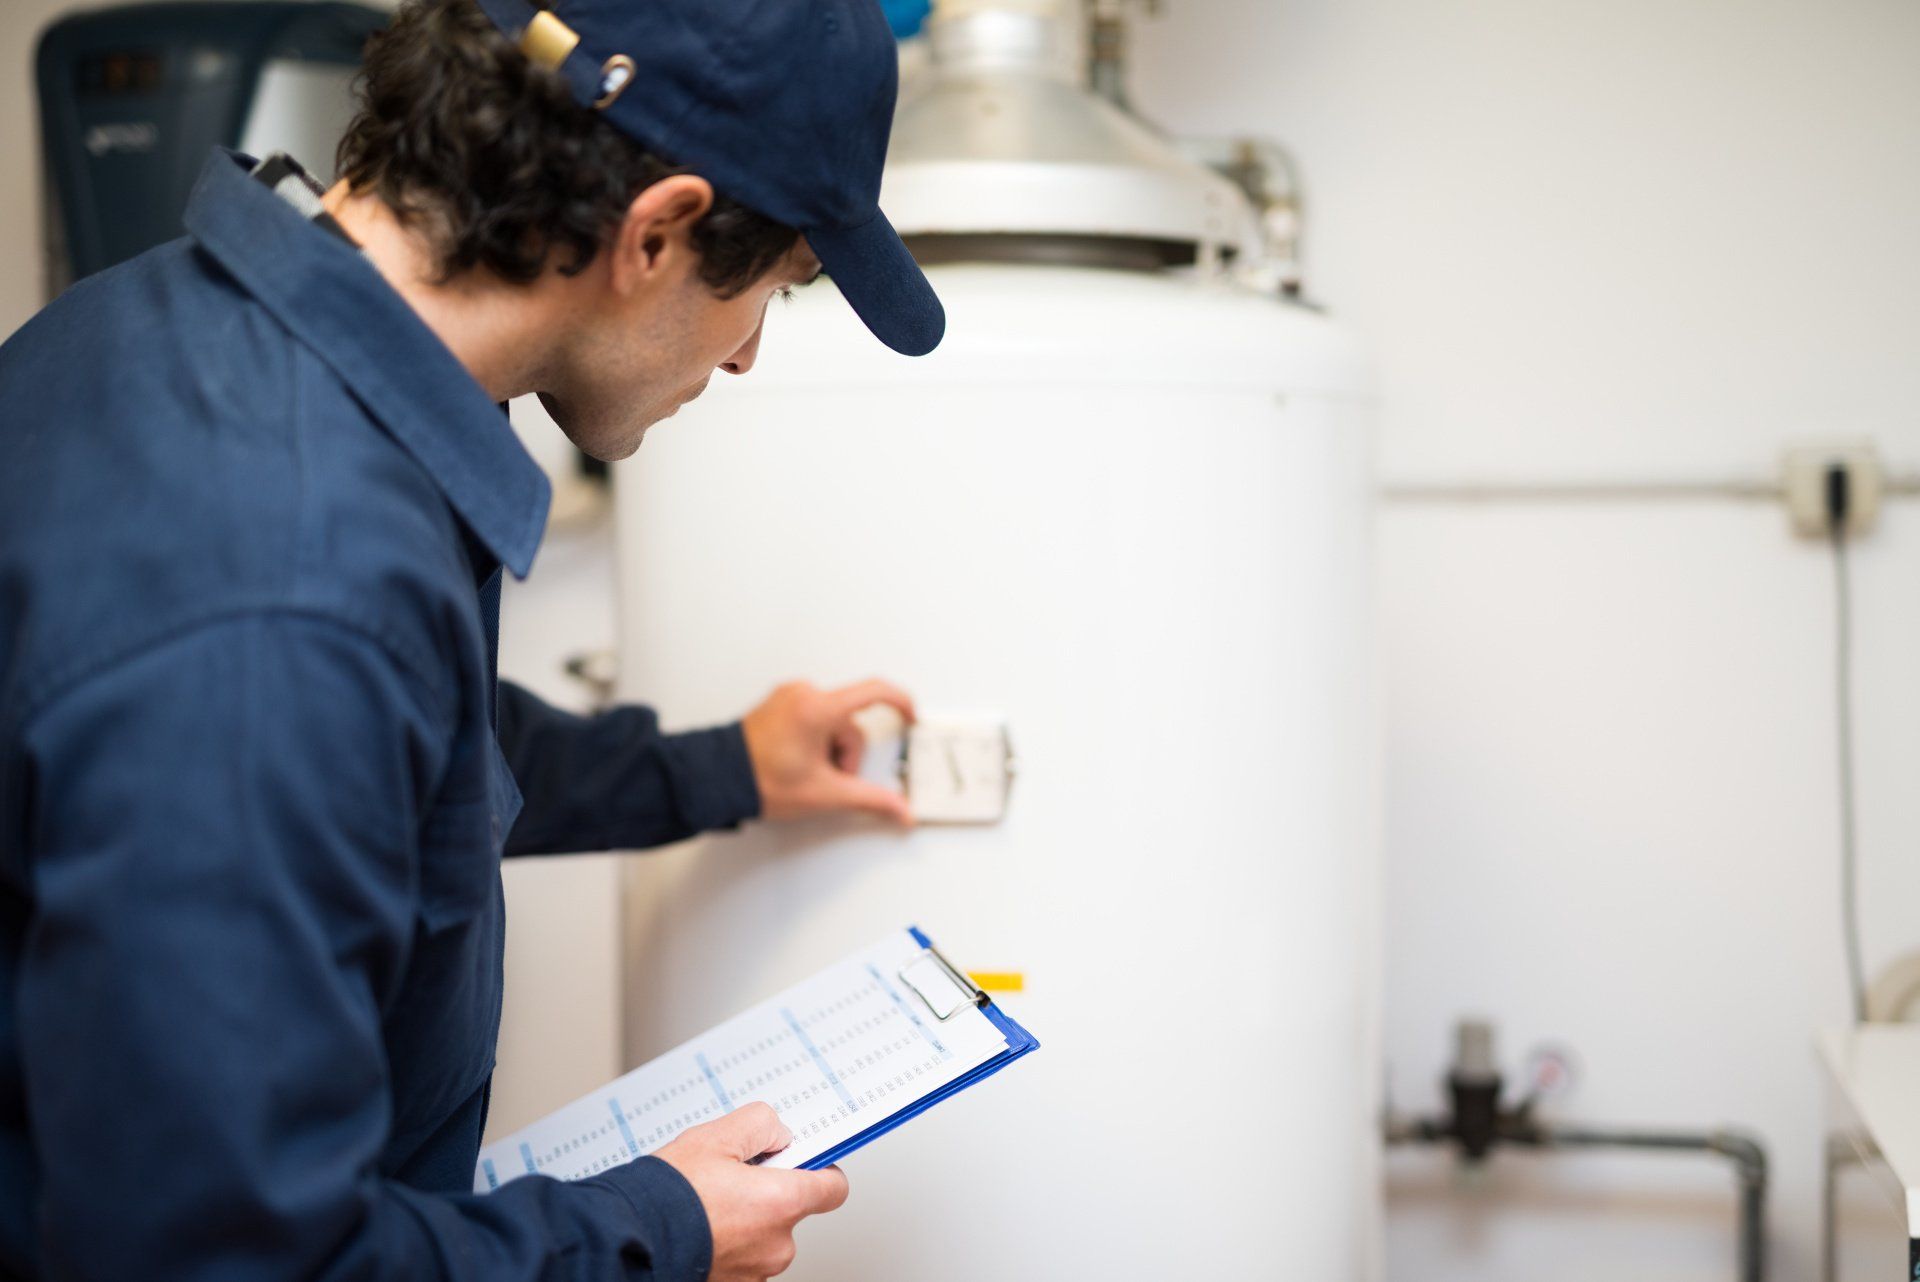 Furnace Service in Baton Rouge: What Can You Expect from Your Heating Technician?